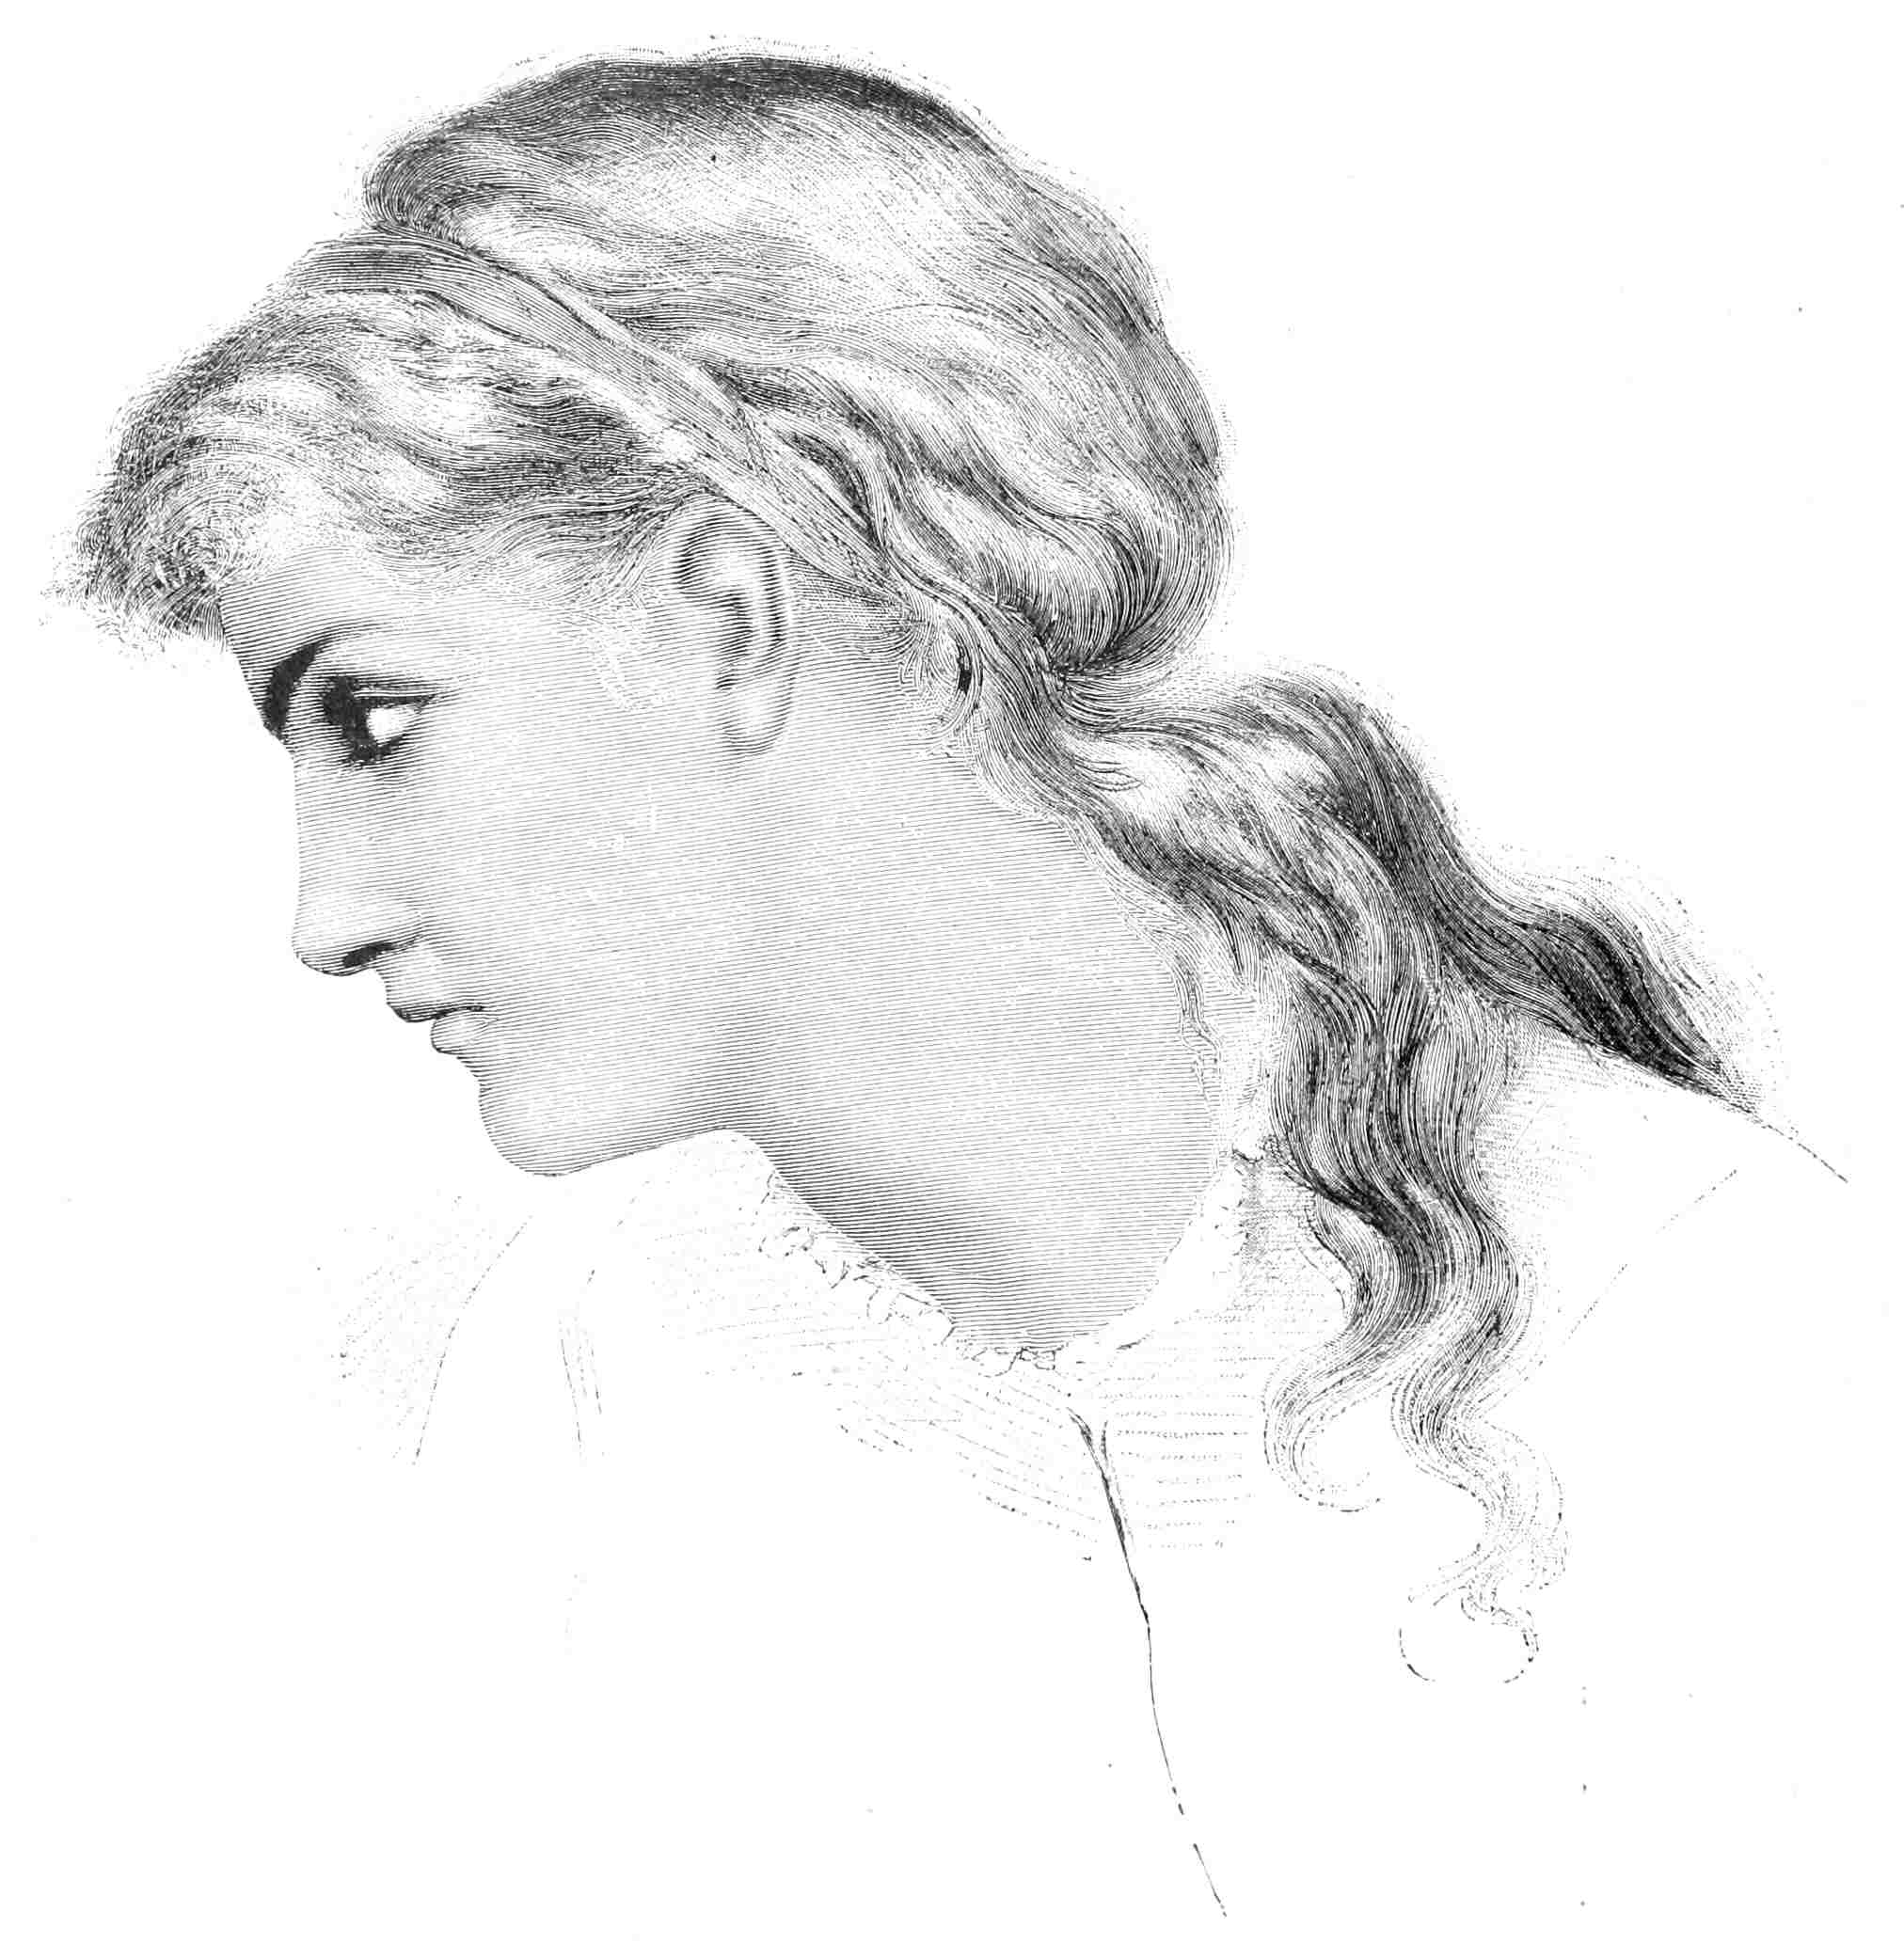 Young woman's face in profile